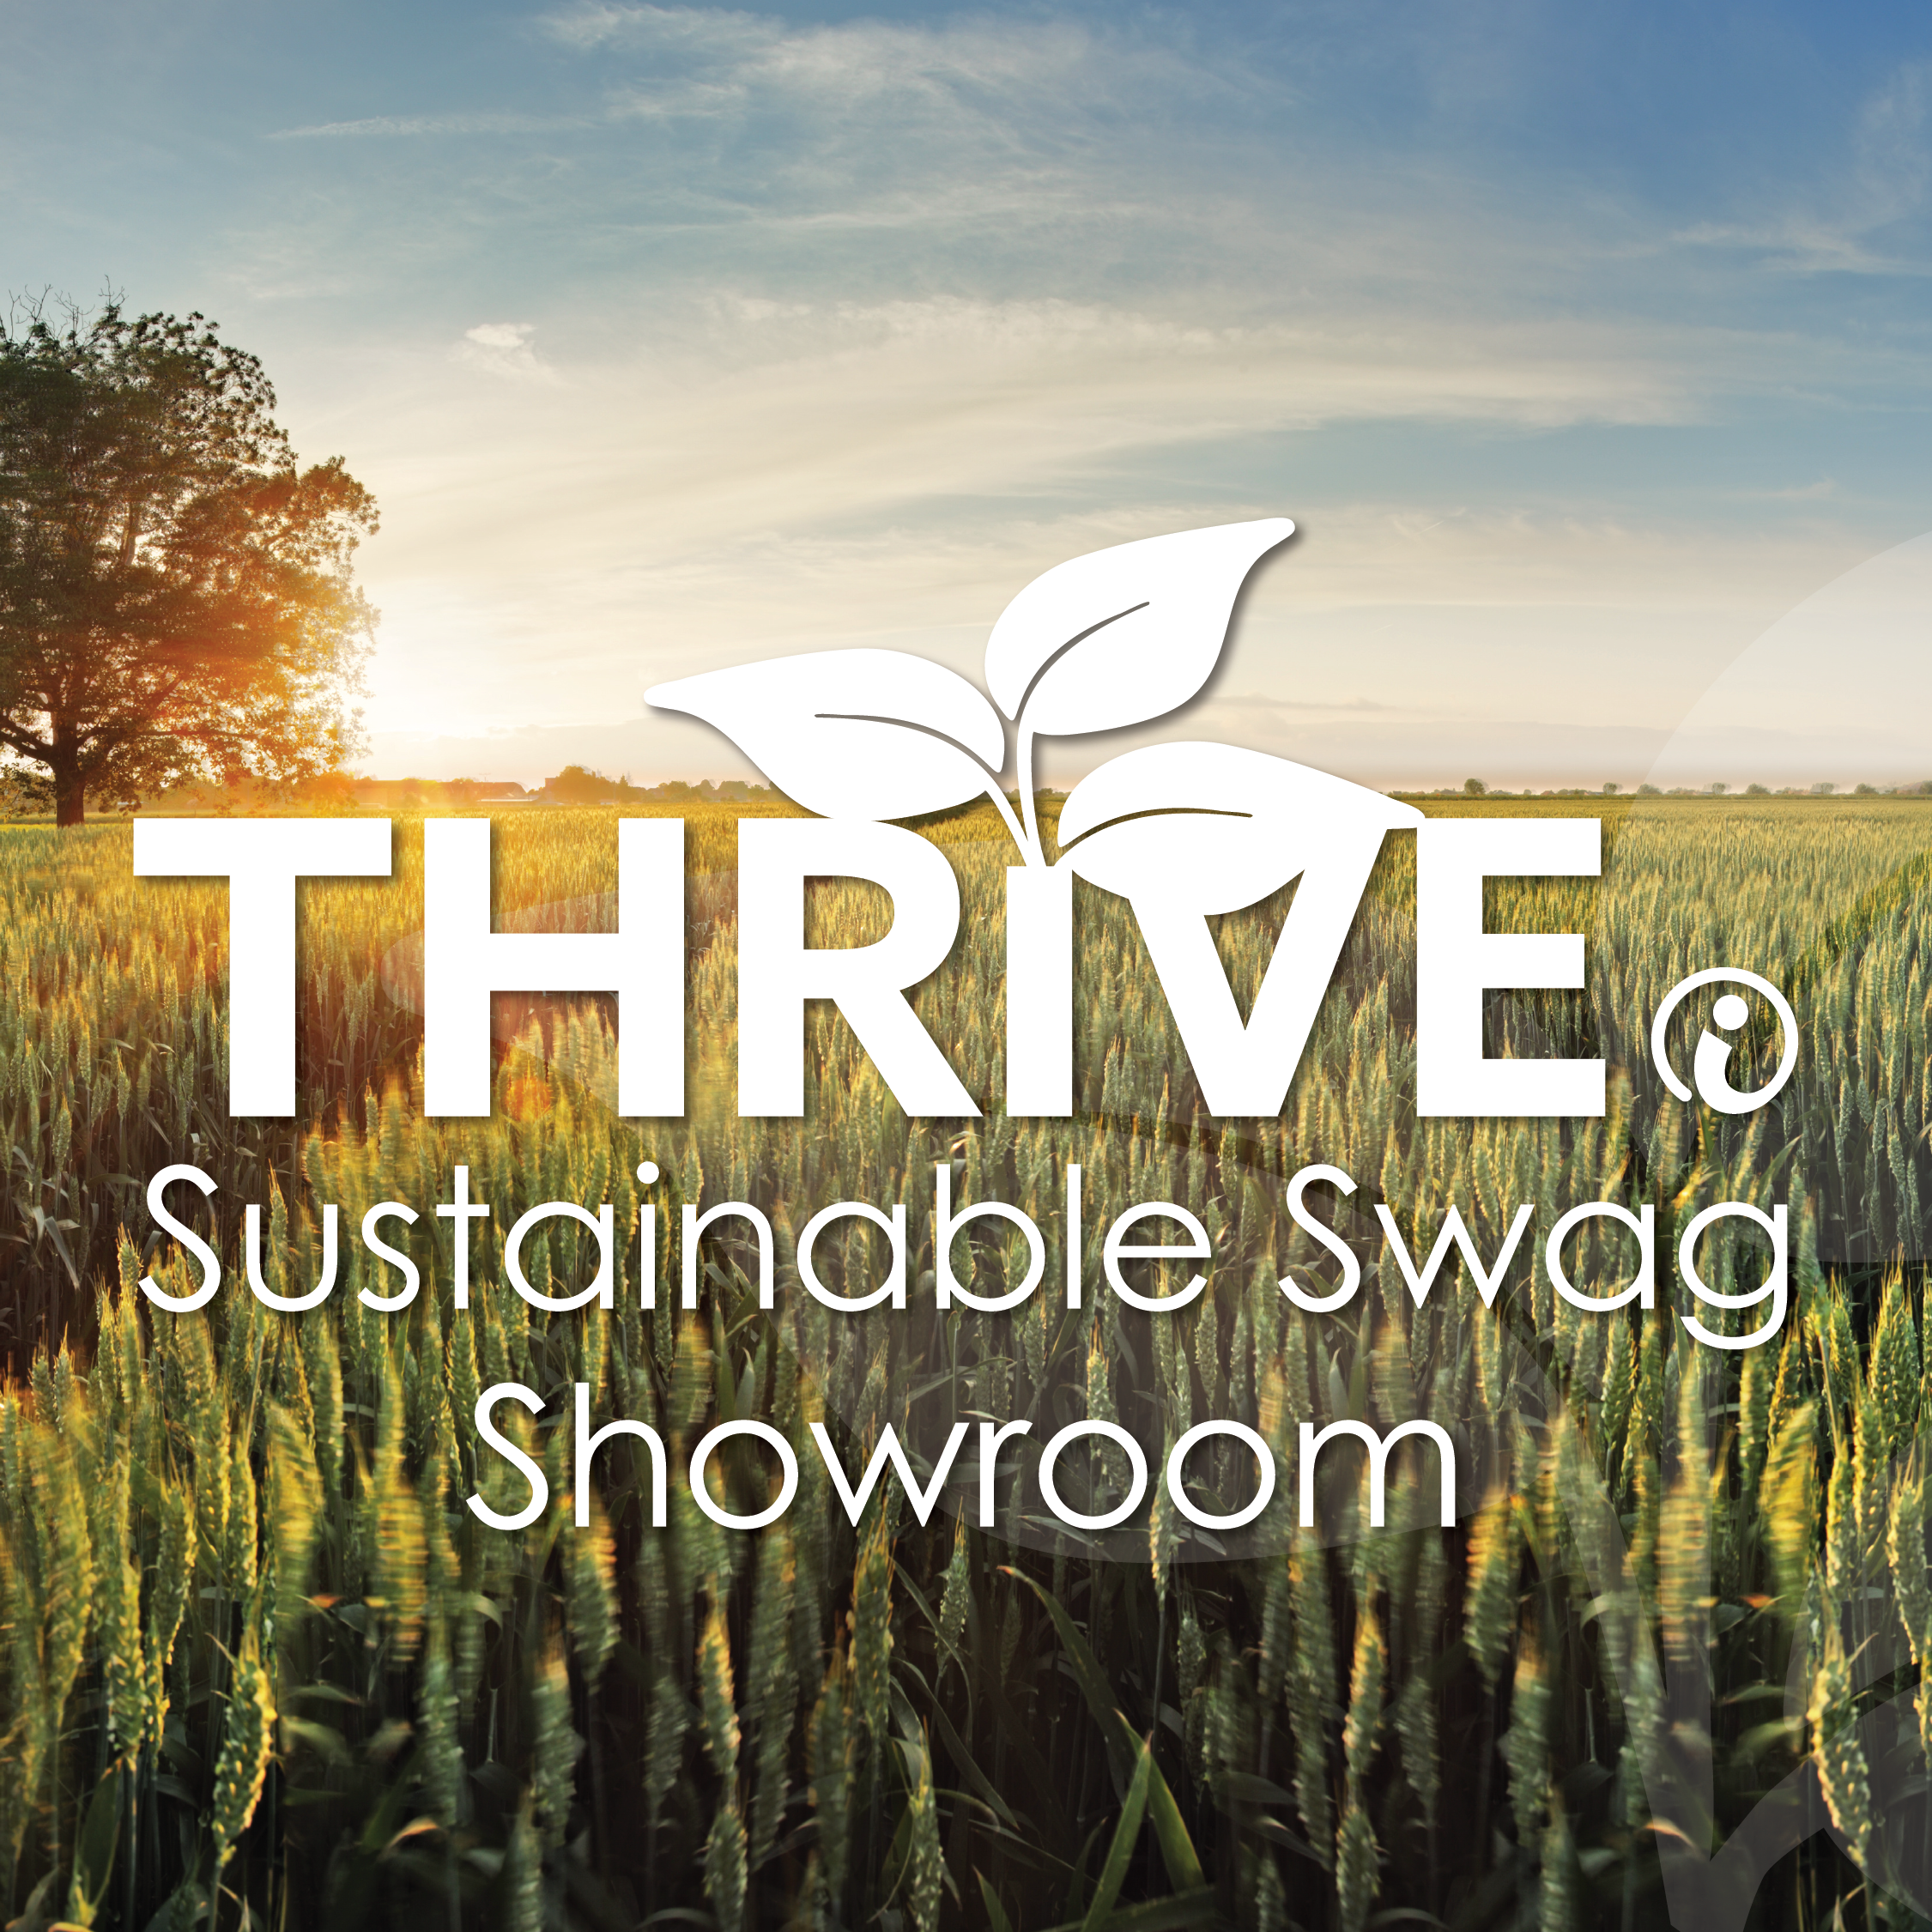 Image of sun setting over a green field of wheat with the Thrive Sustainable Swag logo superimposed on top.